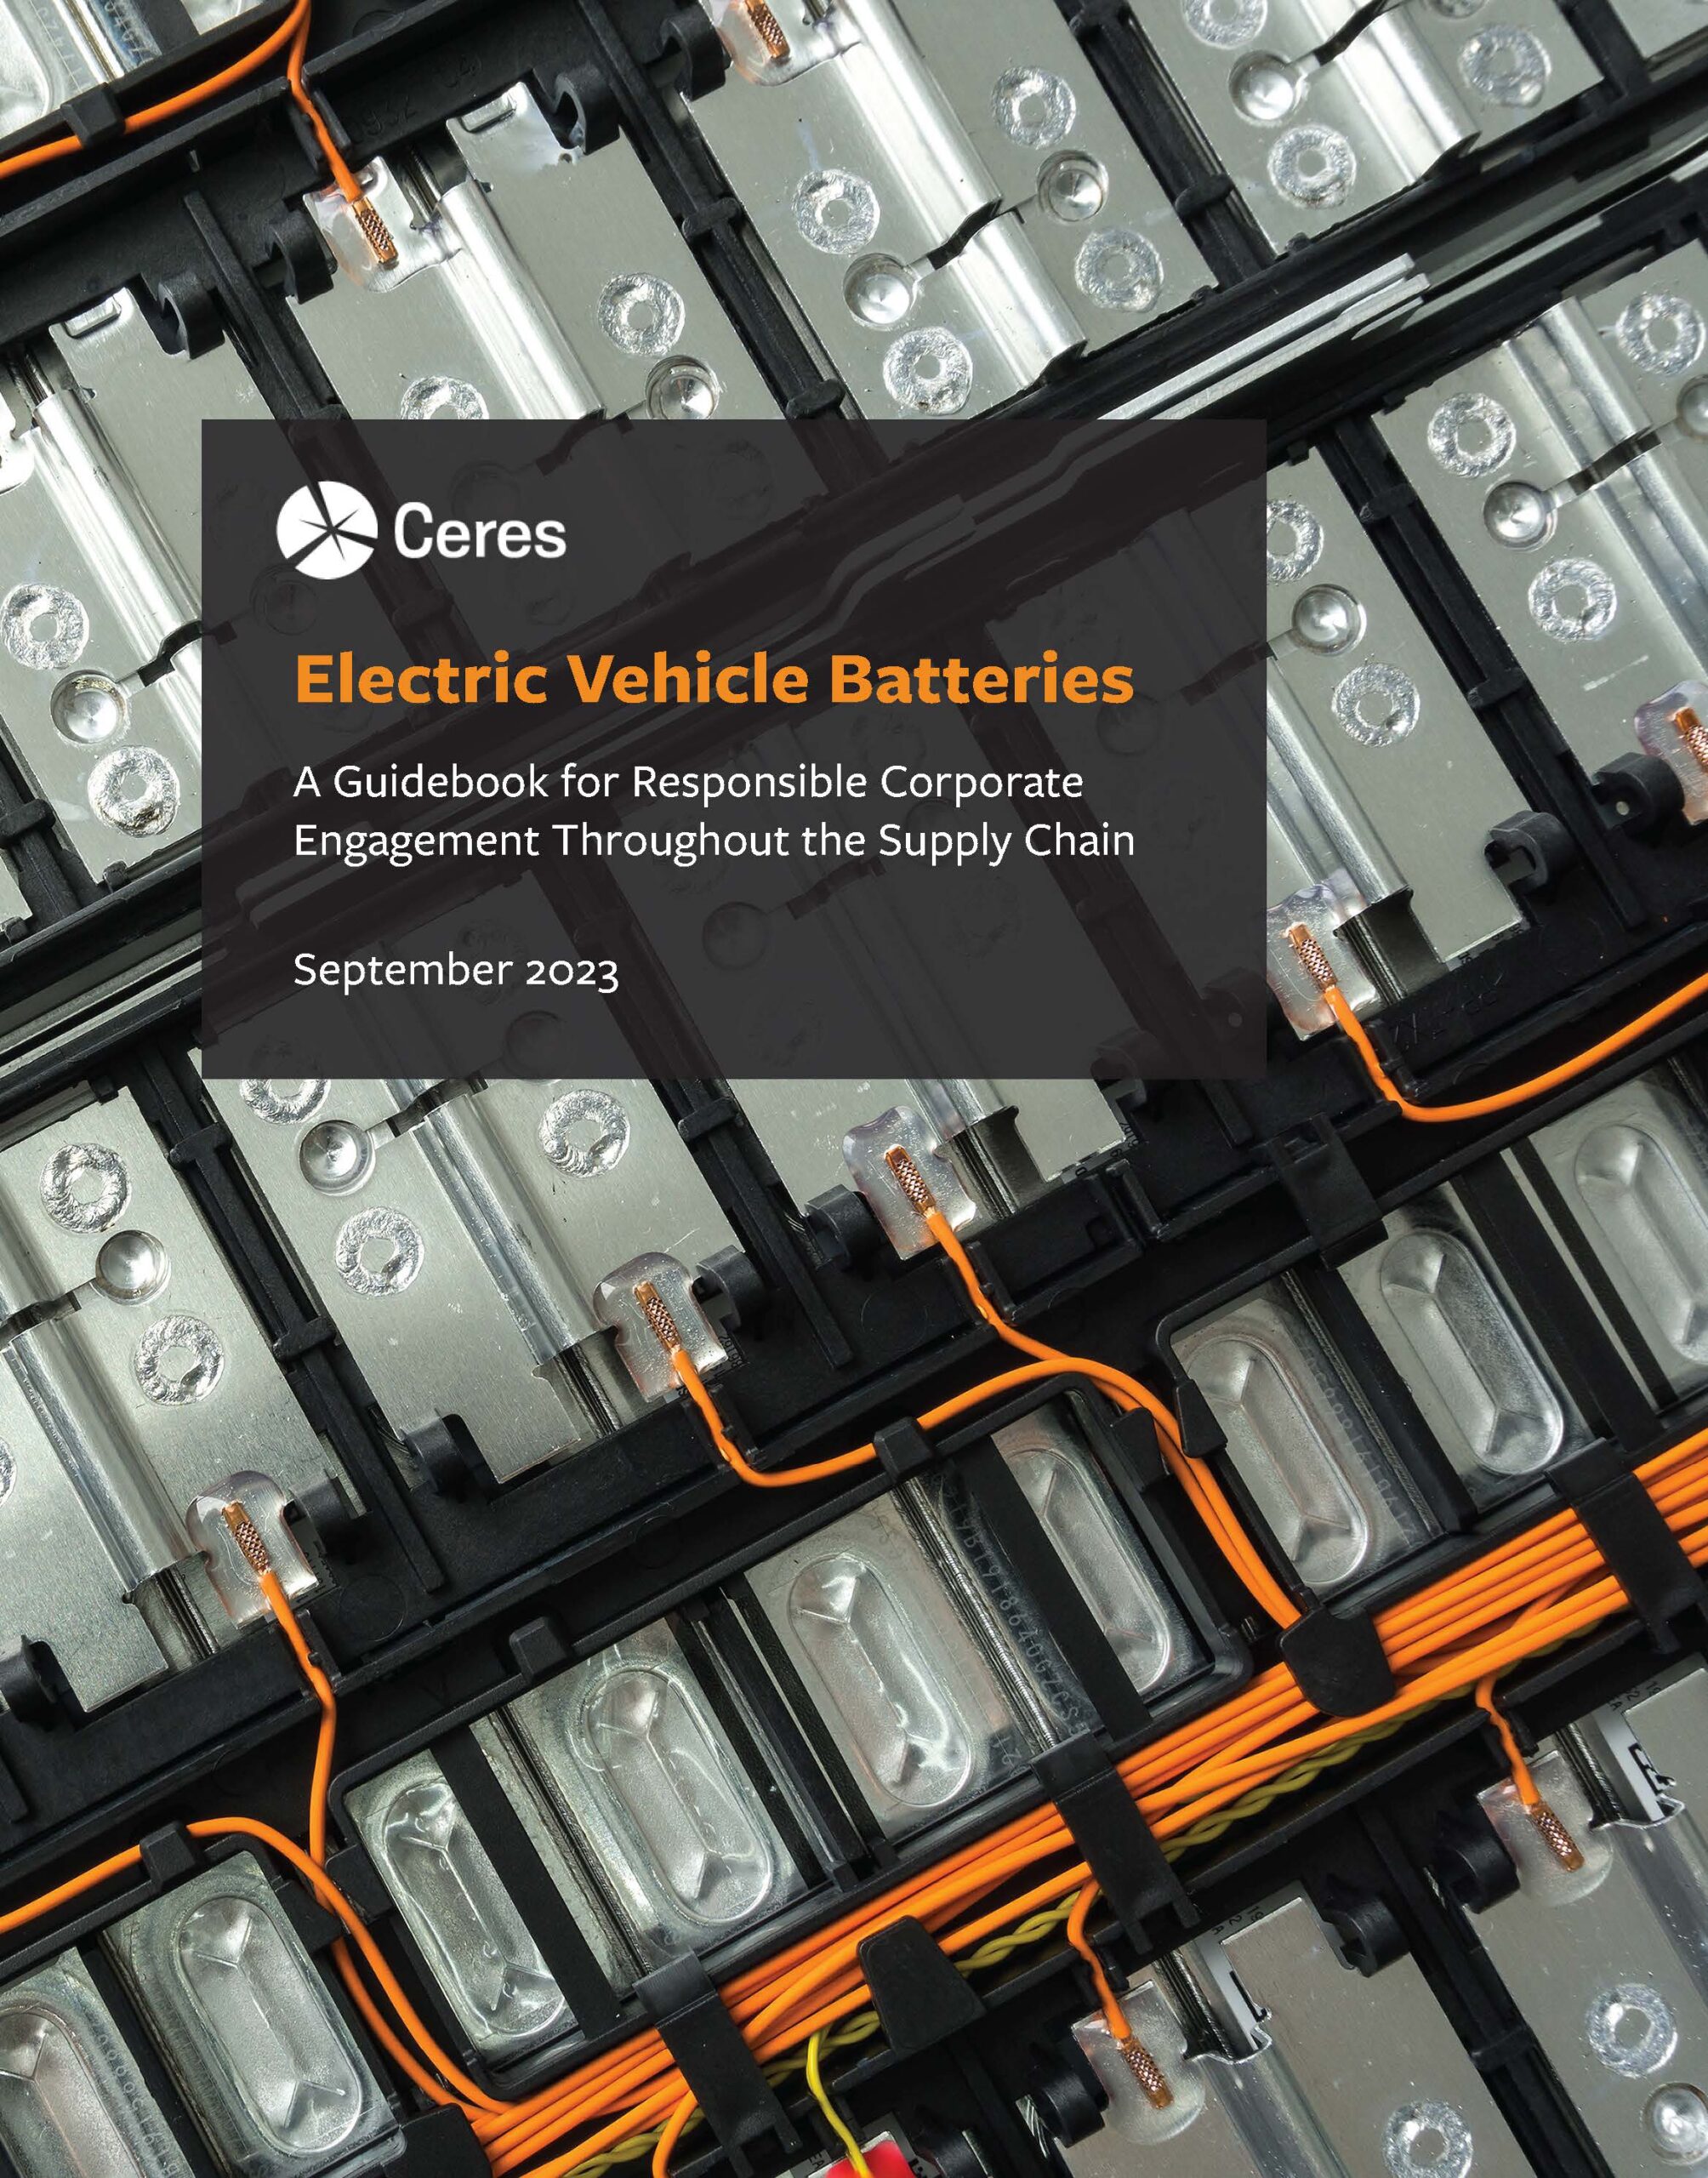 Cover Page Title: CEVA Electric Vehicle Batteries A Guidebook for Responsible Corporate Engagement Throughout the Supply Chain September 2023 // Description: batteries connected by orange wires